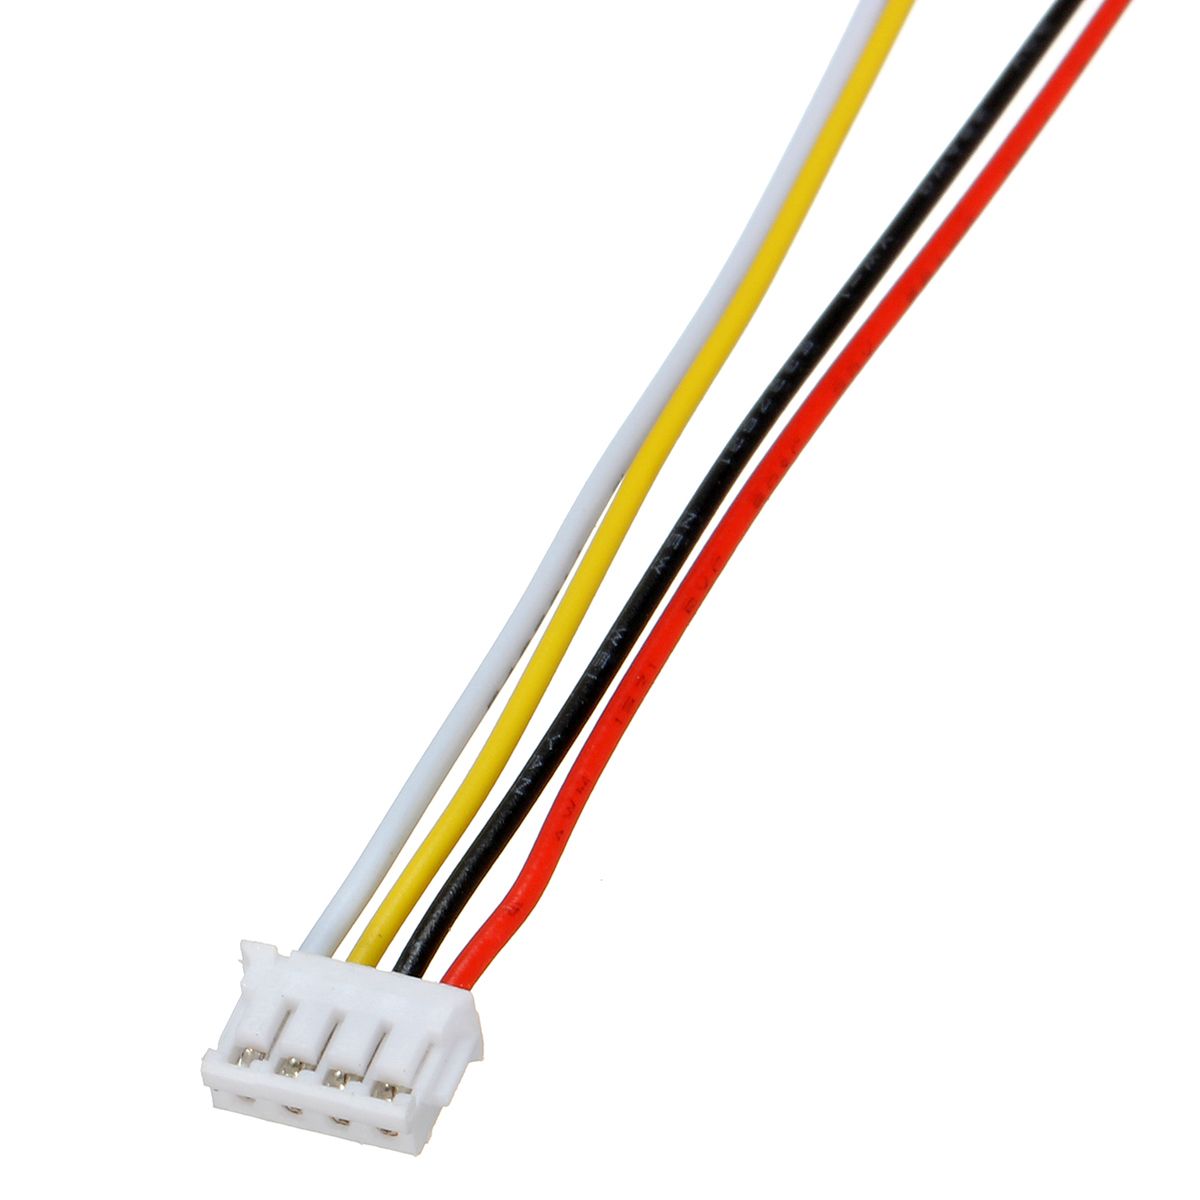 Connector JST micro 1.25mm pitch 4-pin male-male met 10cm kabel